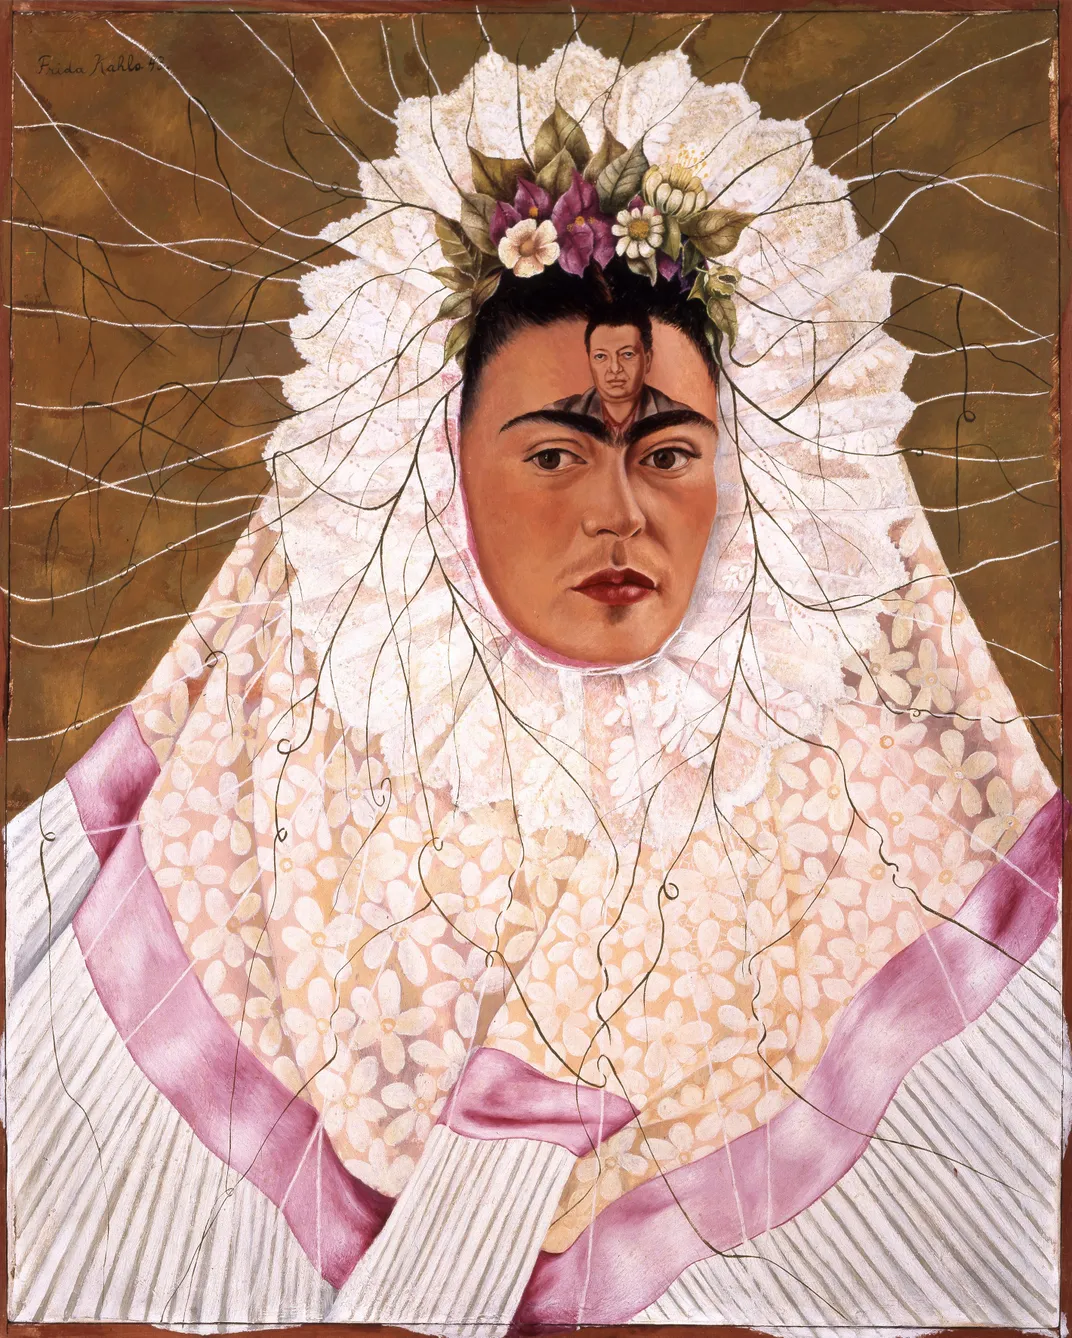 How Frida Kahlo and Diego Rivera Defined Mexican Art in the Wake of Revolution. Smart News. Smithsonian Magazine